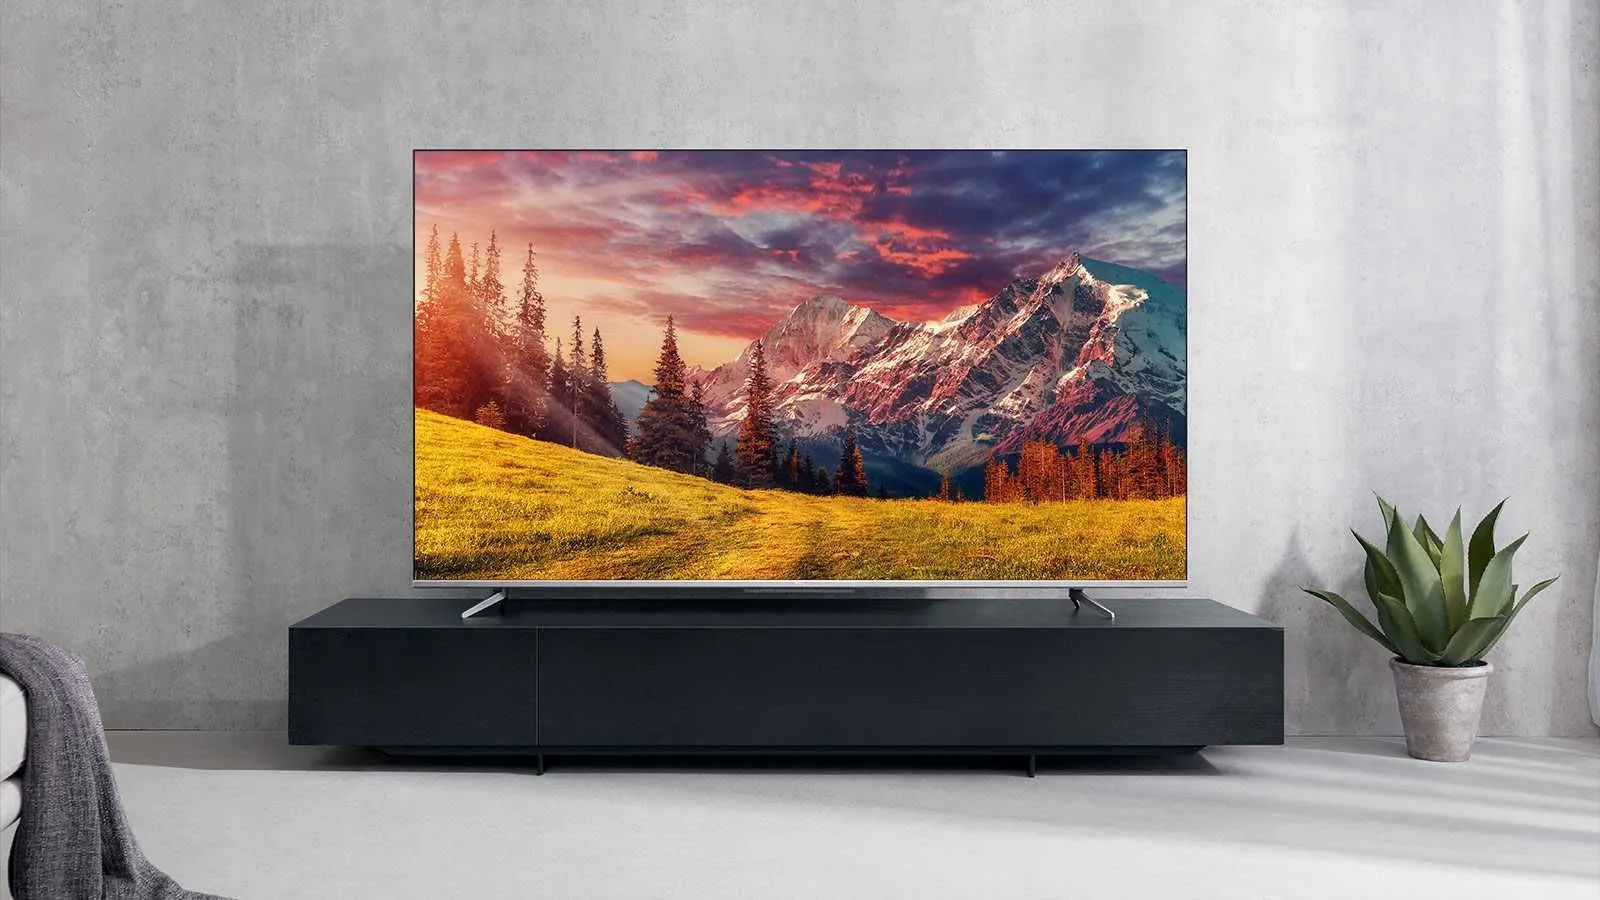 Телевизор TCL 50" 4K LED Smart TV Wi-Fi Android#2